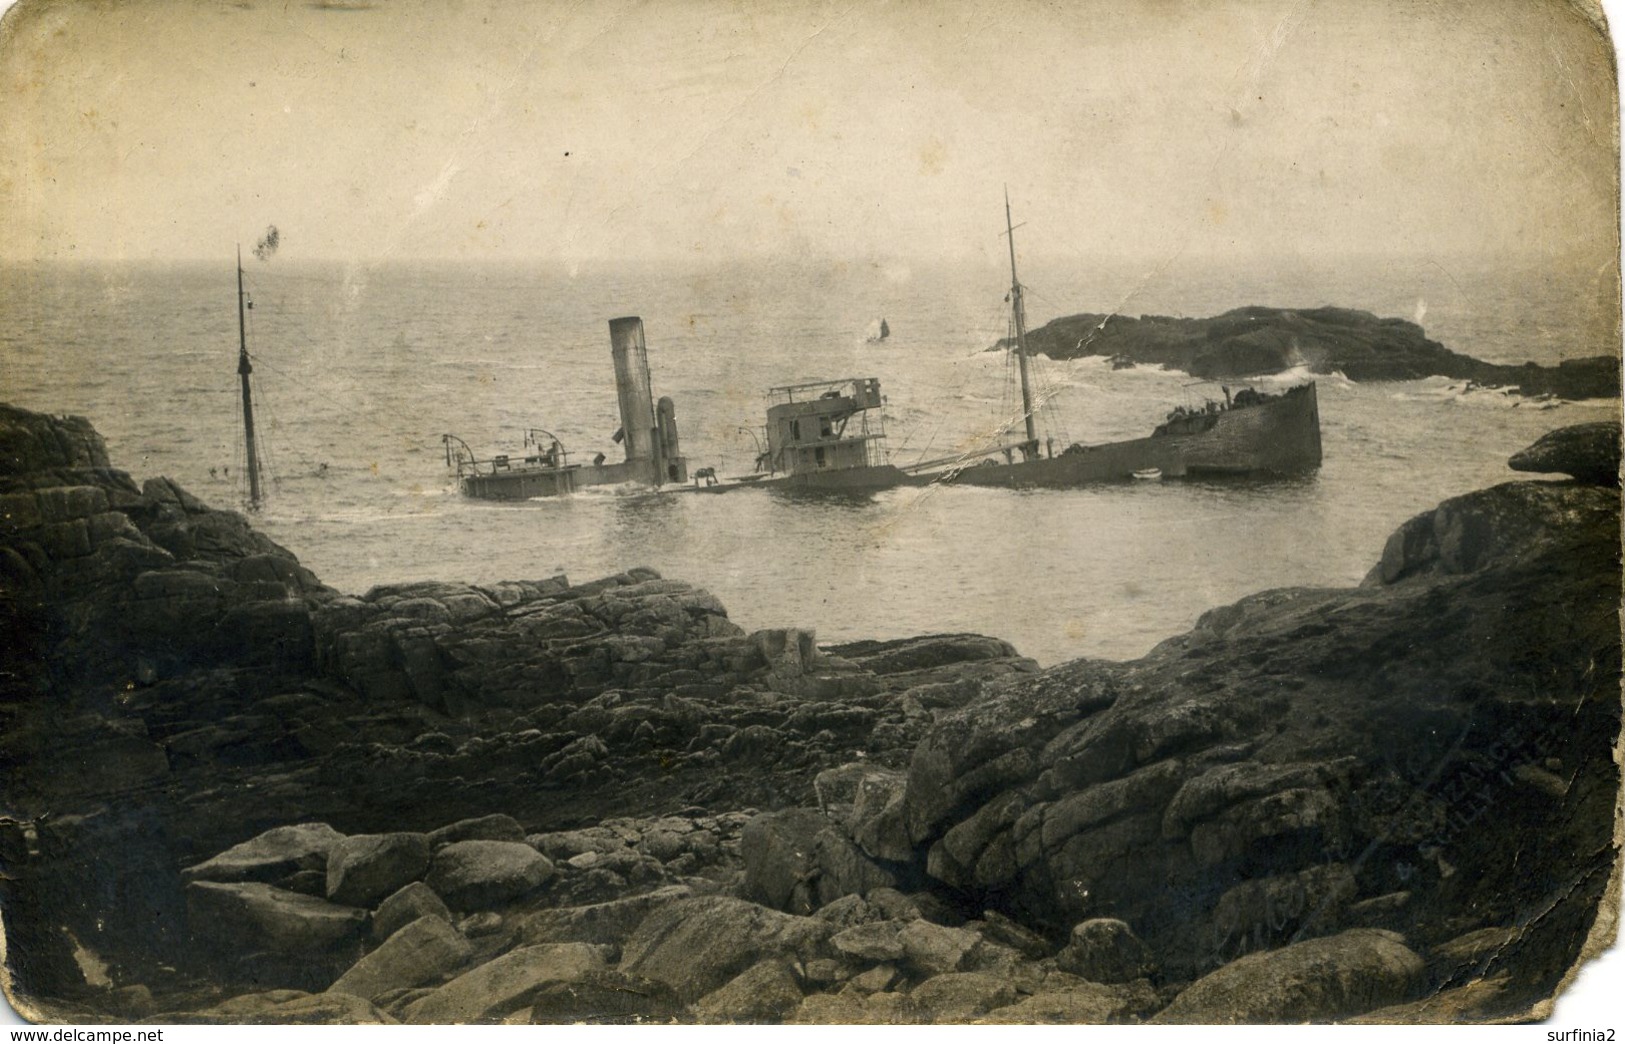 SCILLY ISLES? - WRECK OF UNKNOWN SHIP RP Sc12 - Scilly Isles